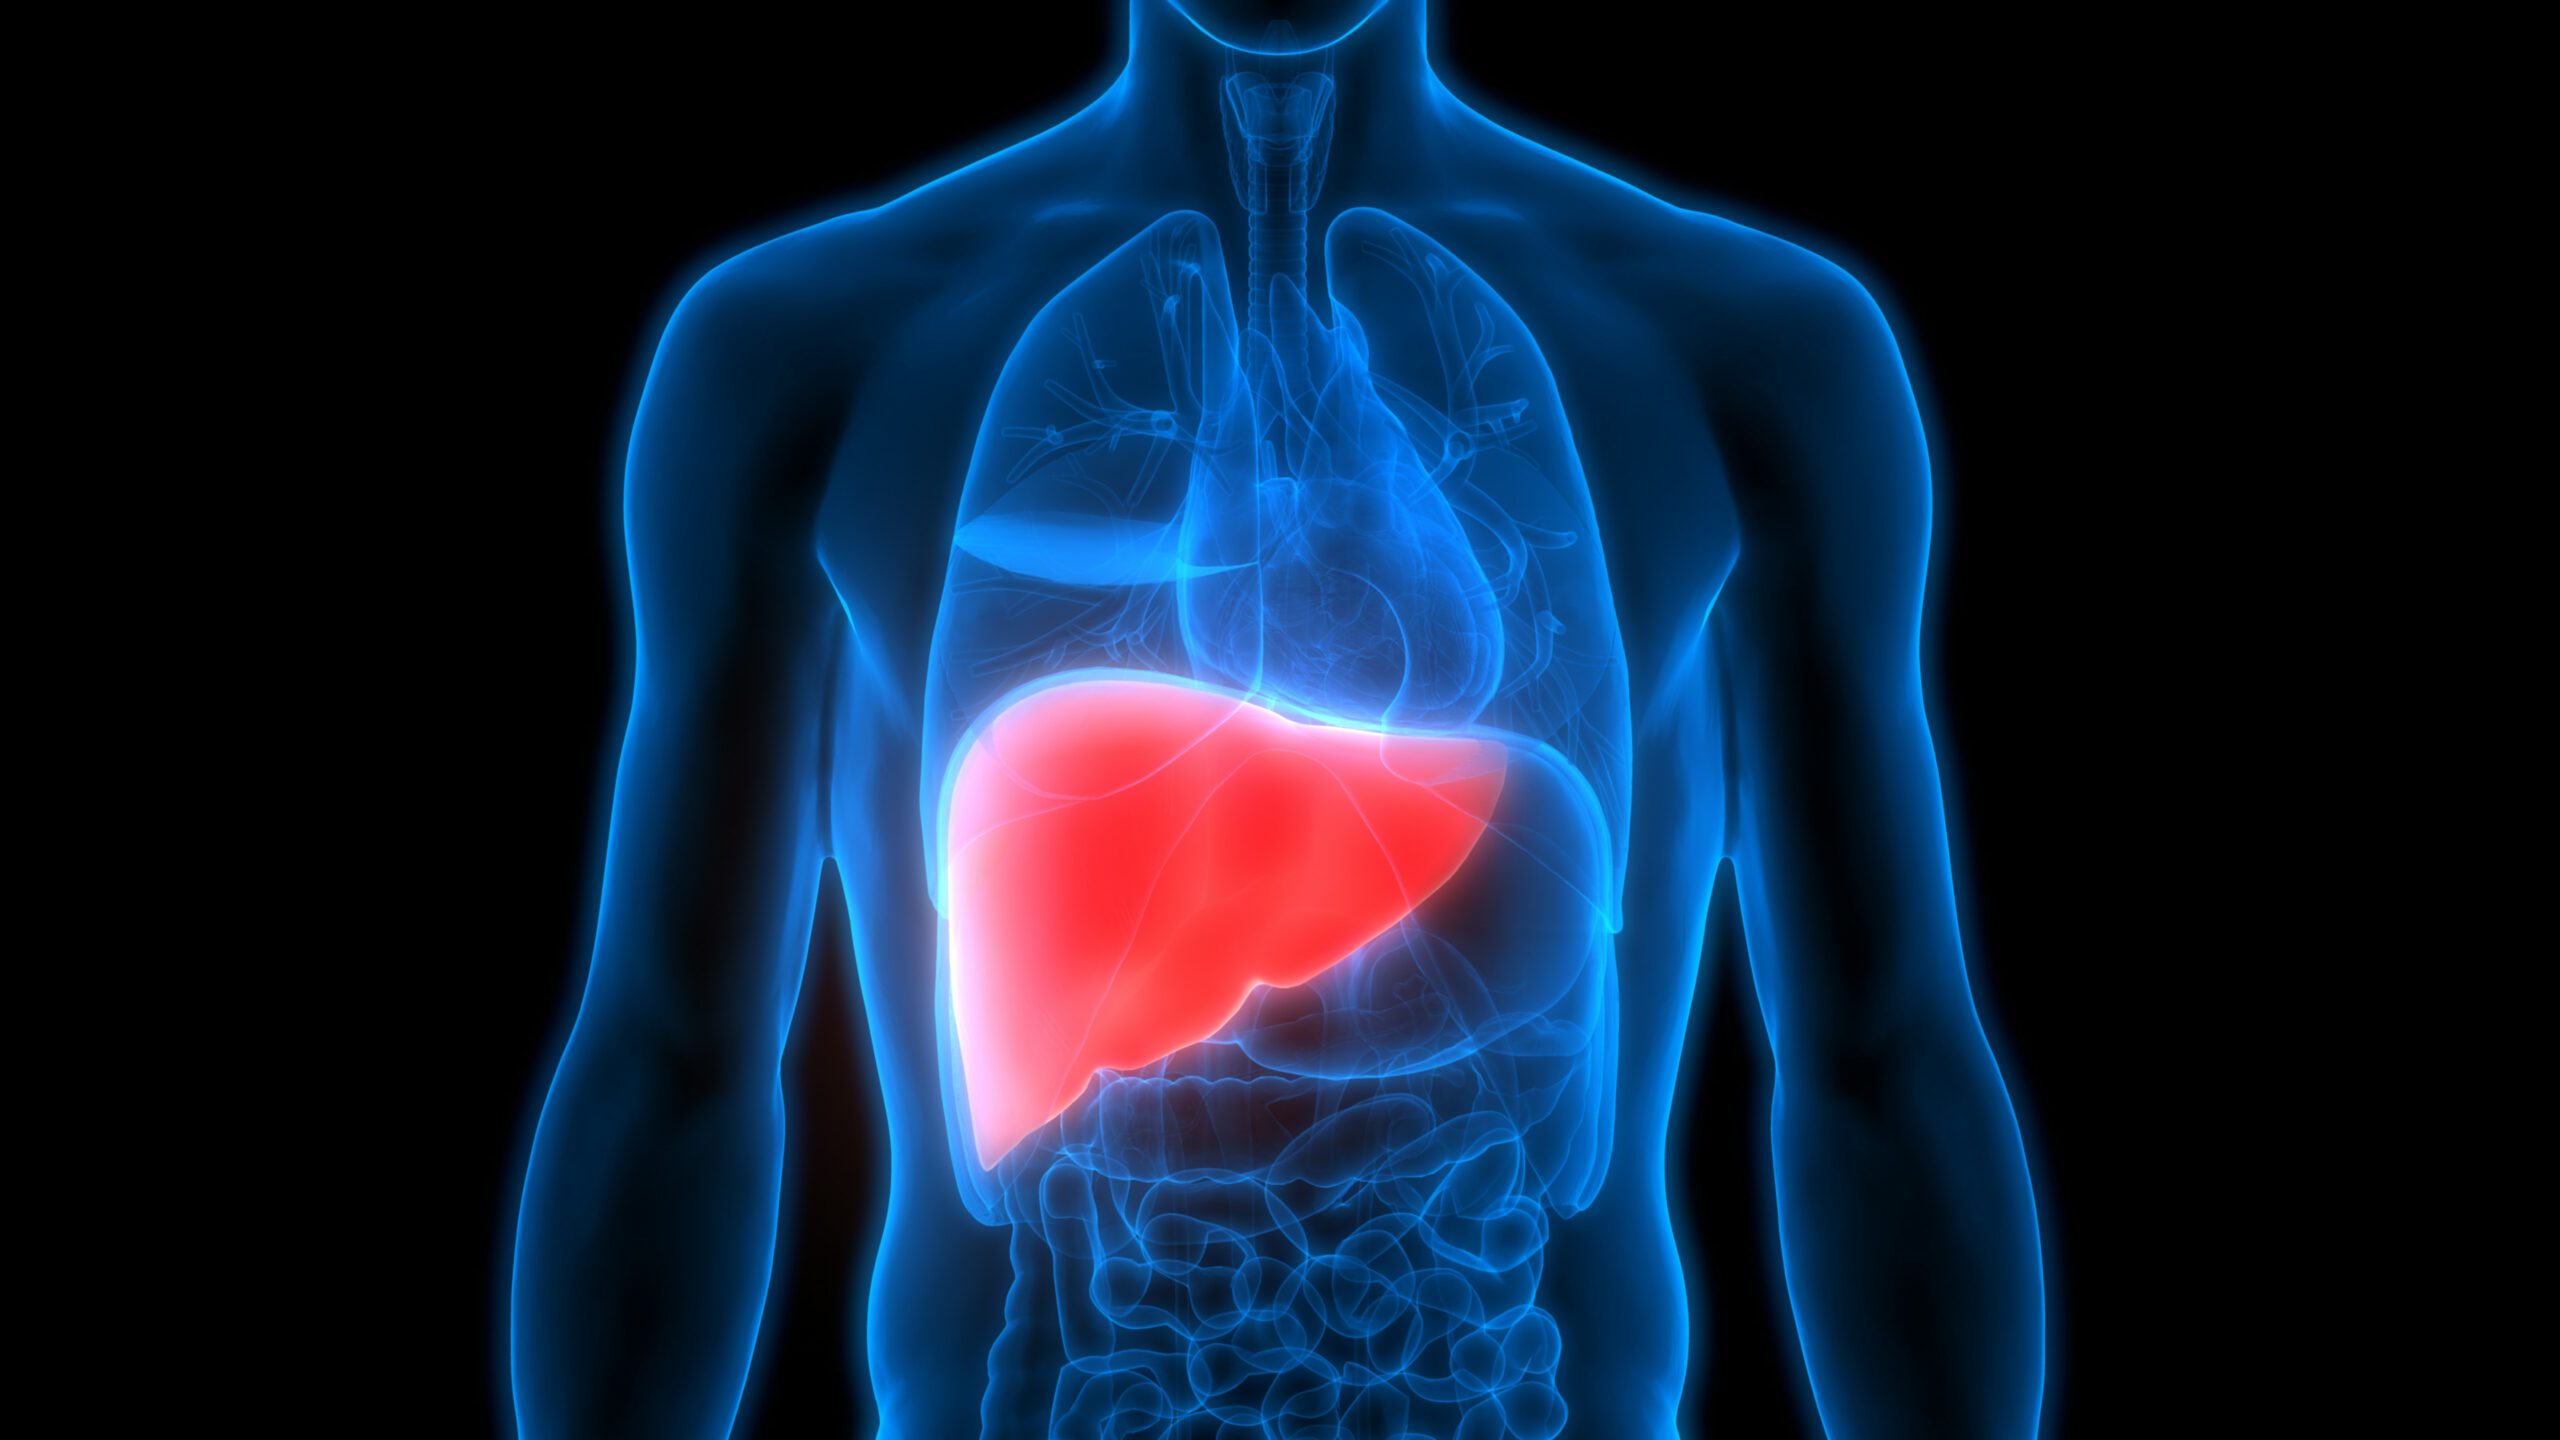 Fatty liver is the fat deposition in the normal liver. (Wikimedia Commons)